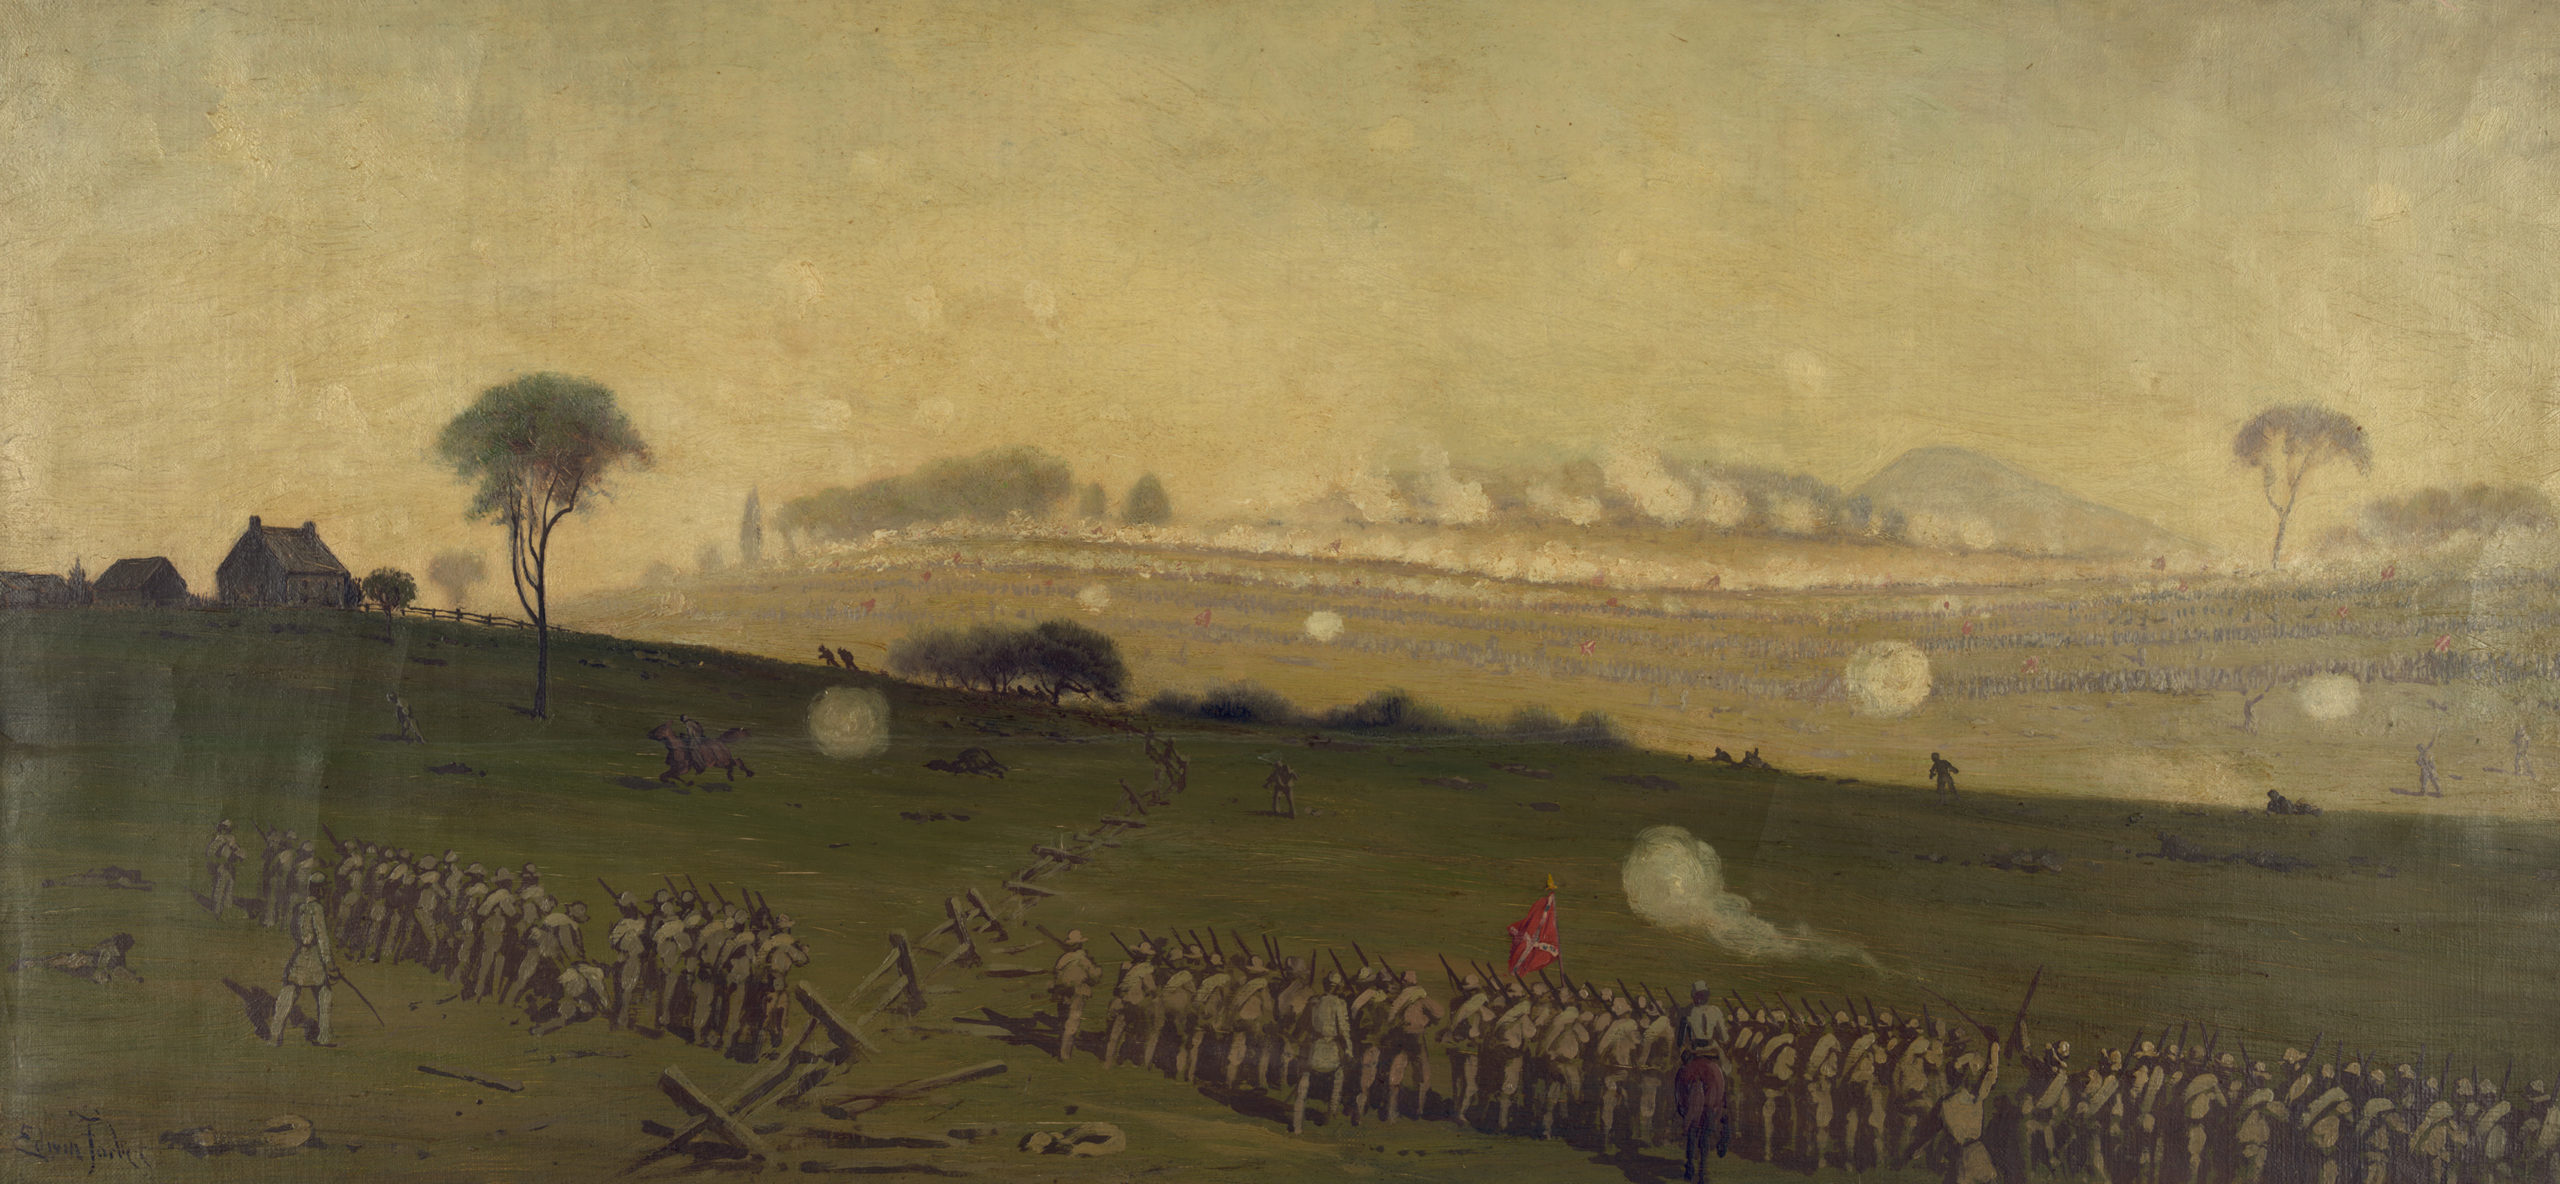 Bullets Weren’t the Only Thing to Worry About at Gettysburg — The Heat Could Be Just as Dangerous